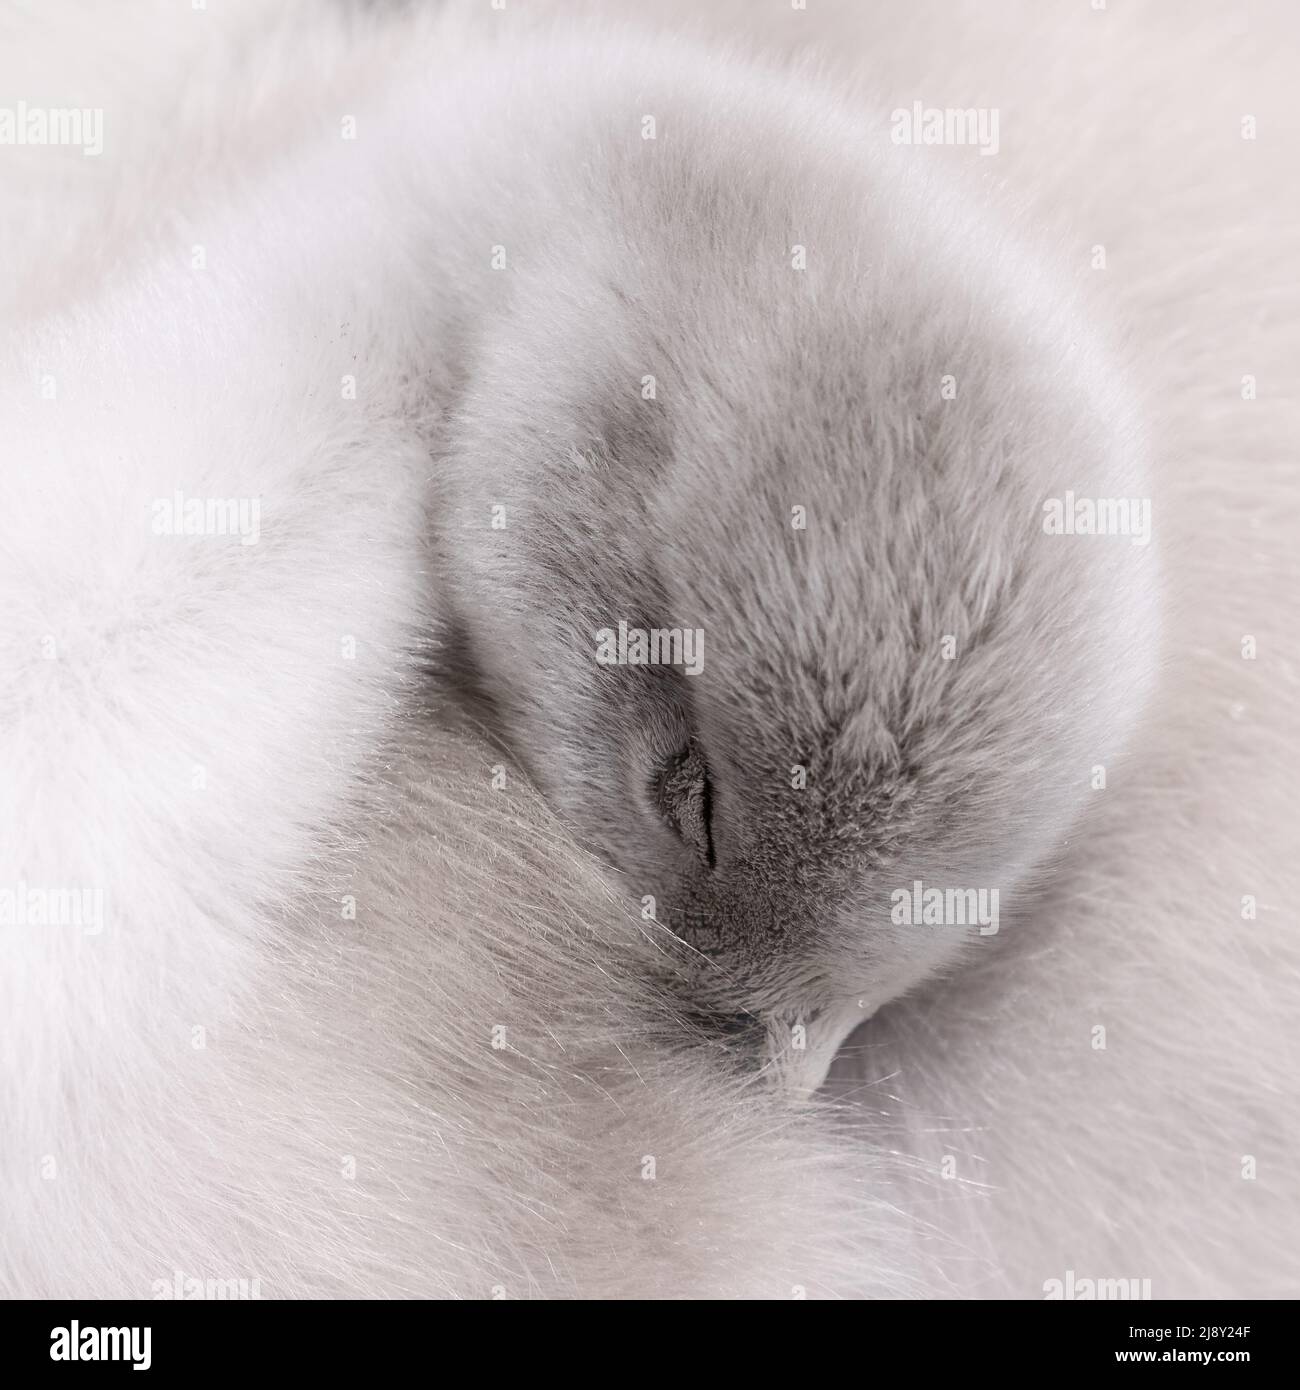 Mute Swan cygnet [ Cygnus olor ] tight crop sleeping  with head tucked into body feathers Stock Photo